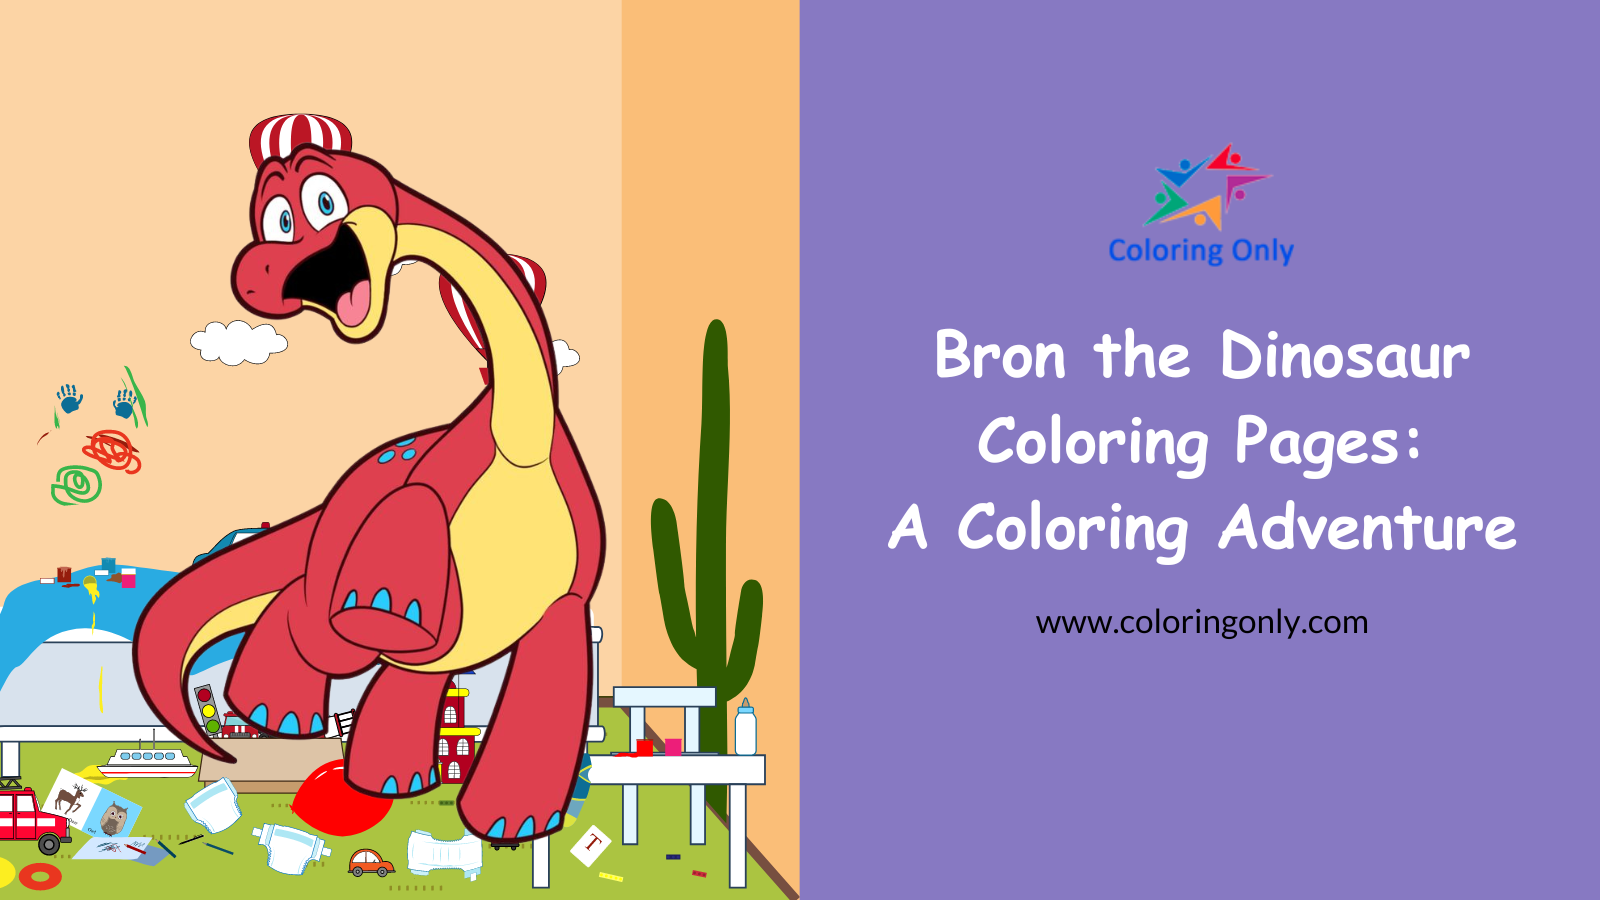 Bron the Dinosaur Coloring Pages: A Coloring Adventure